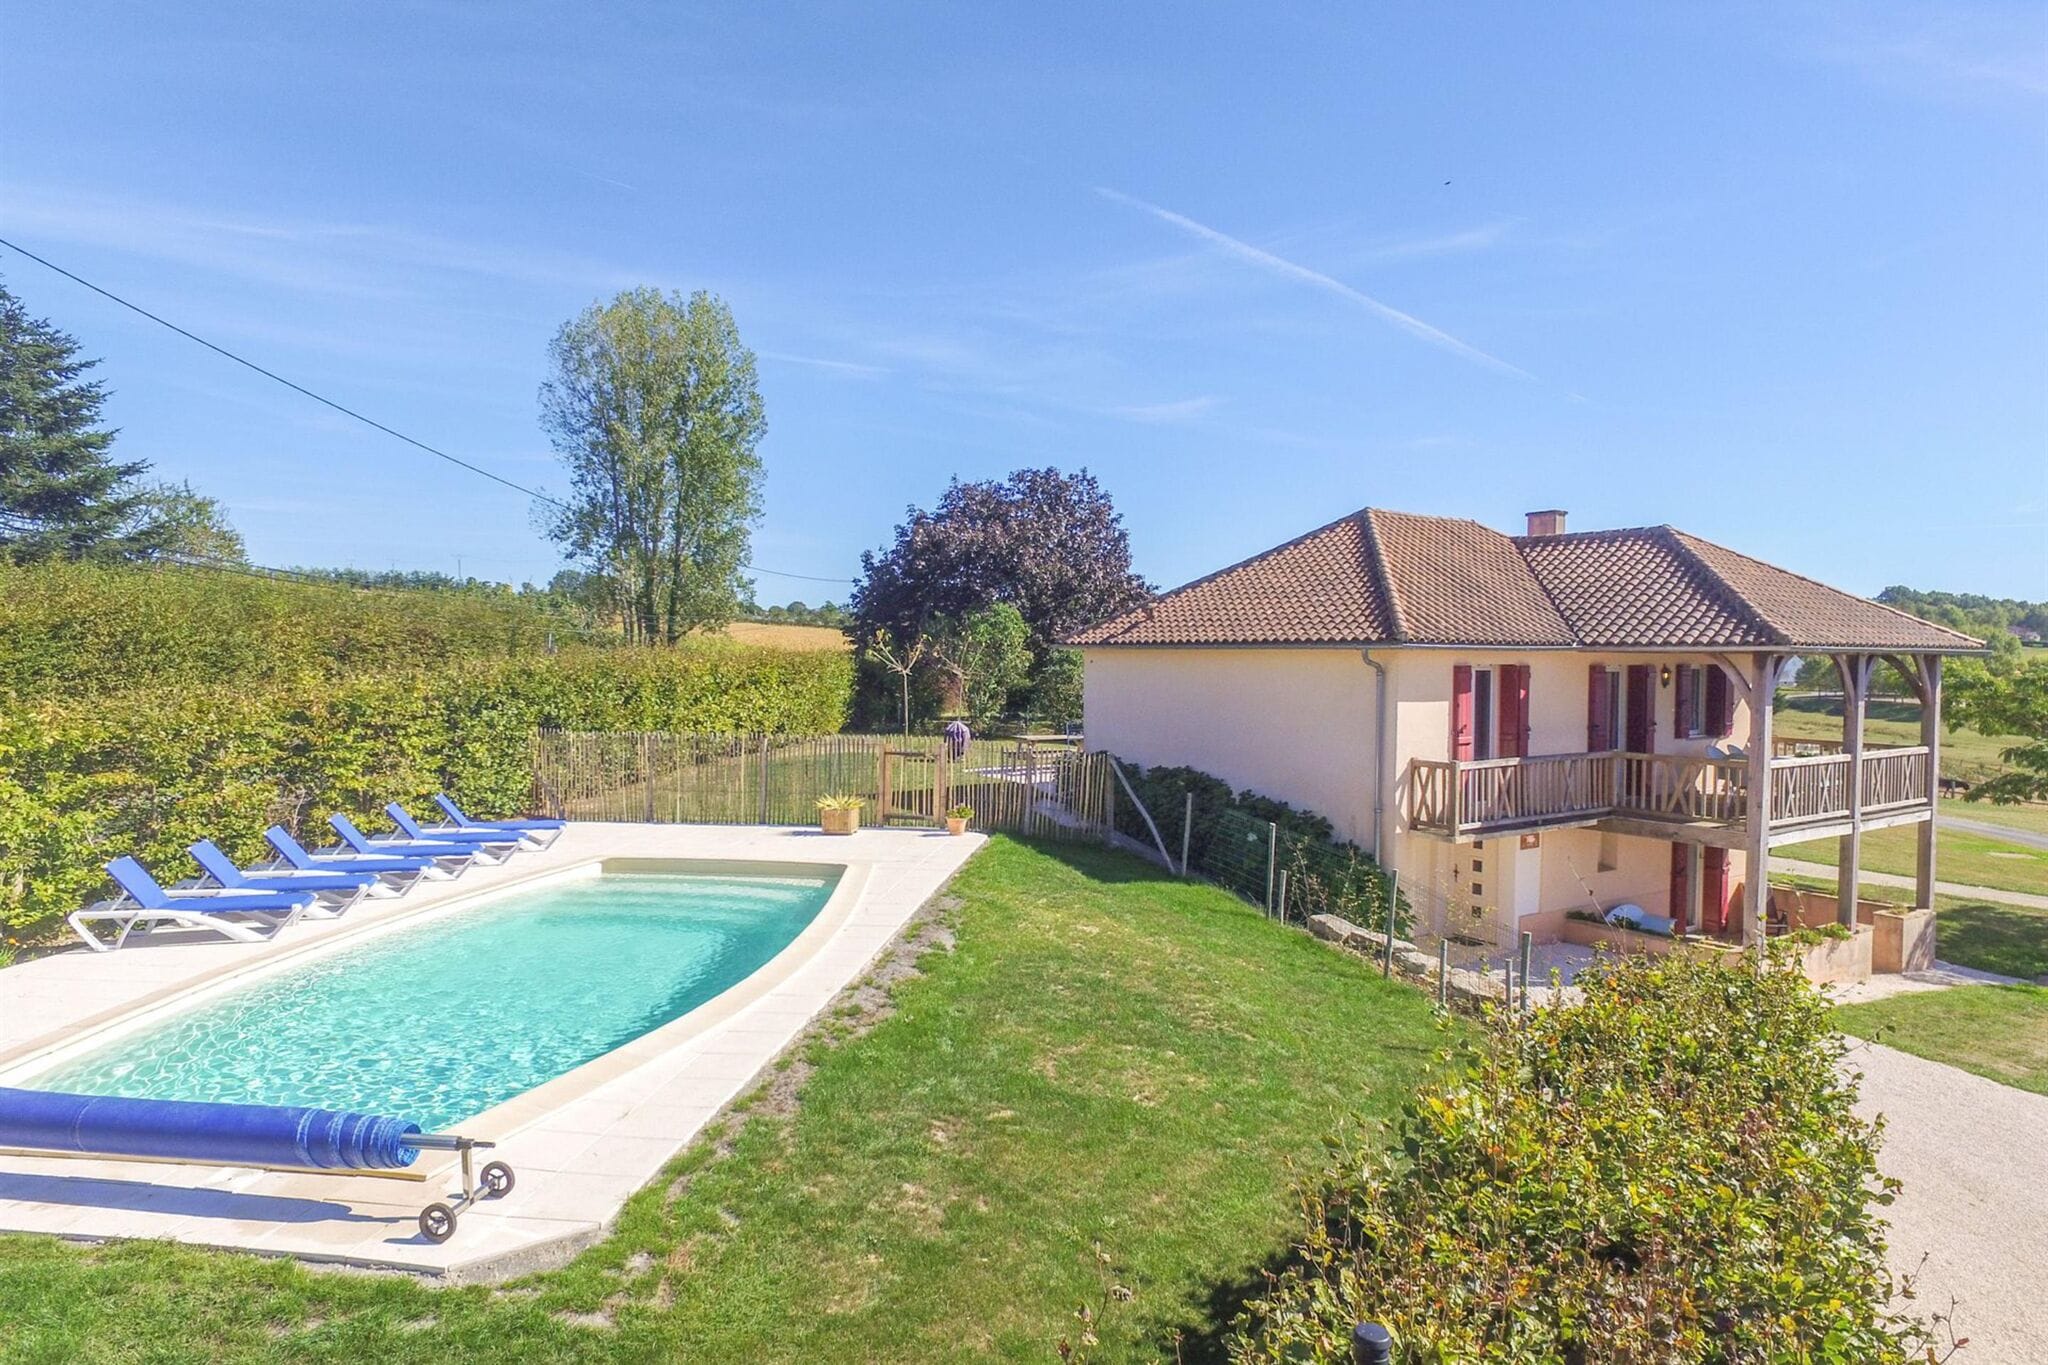 Detached house with stunning views and a private heated swimming pool.